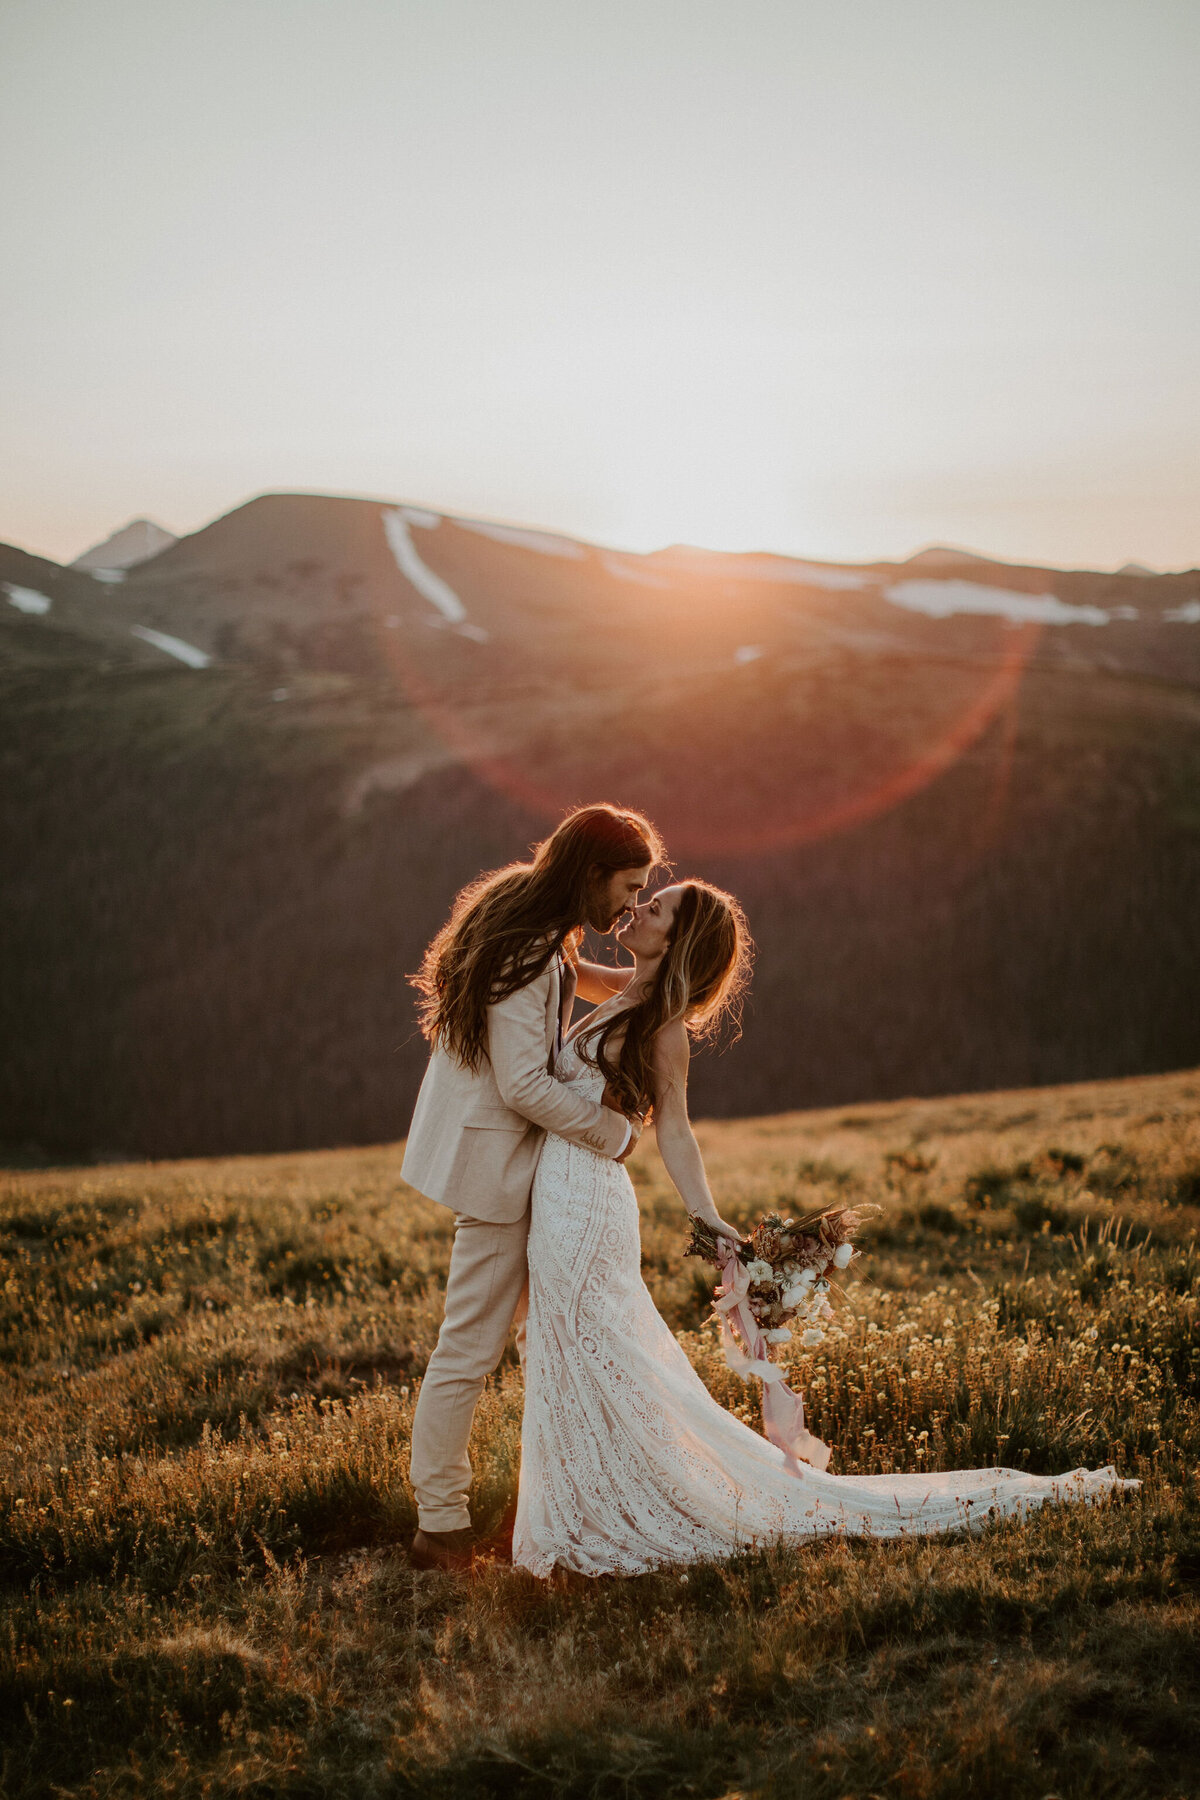 Bride and groom wearing an ivory suit and white wedding gown, kissing during golden hour in a mountain landscape.